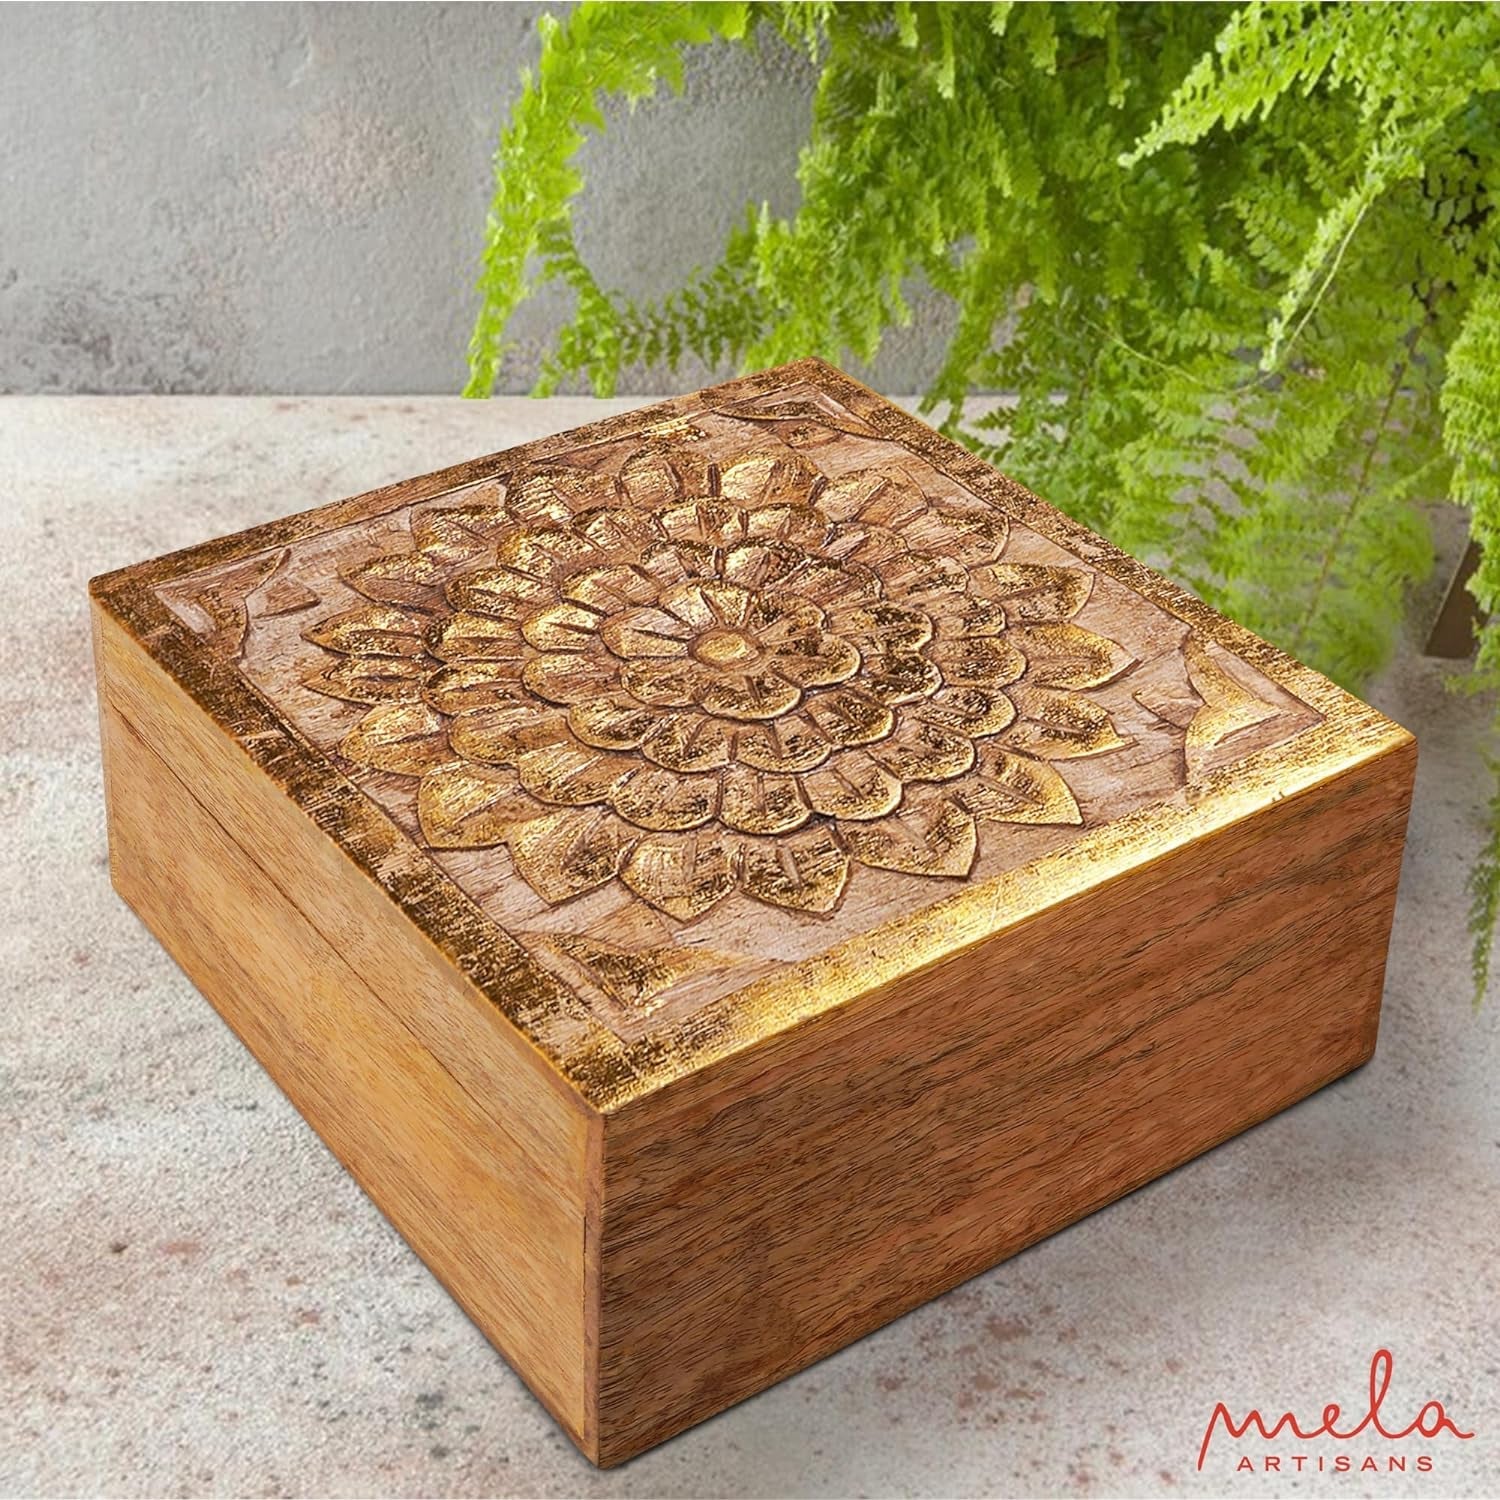 Mela Artisans Blossom Wooden Box - Natural Distressed Gold Decorative Box W/Felt Pads underneath & Wooden Carving - Unique Handmade Mangowood Keepsake Storage Box for Home - 9” X 9” X 4”